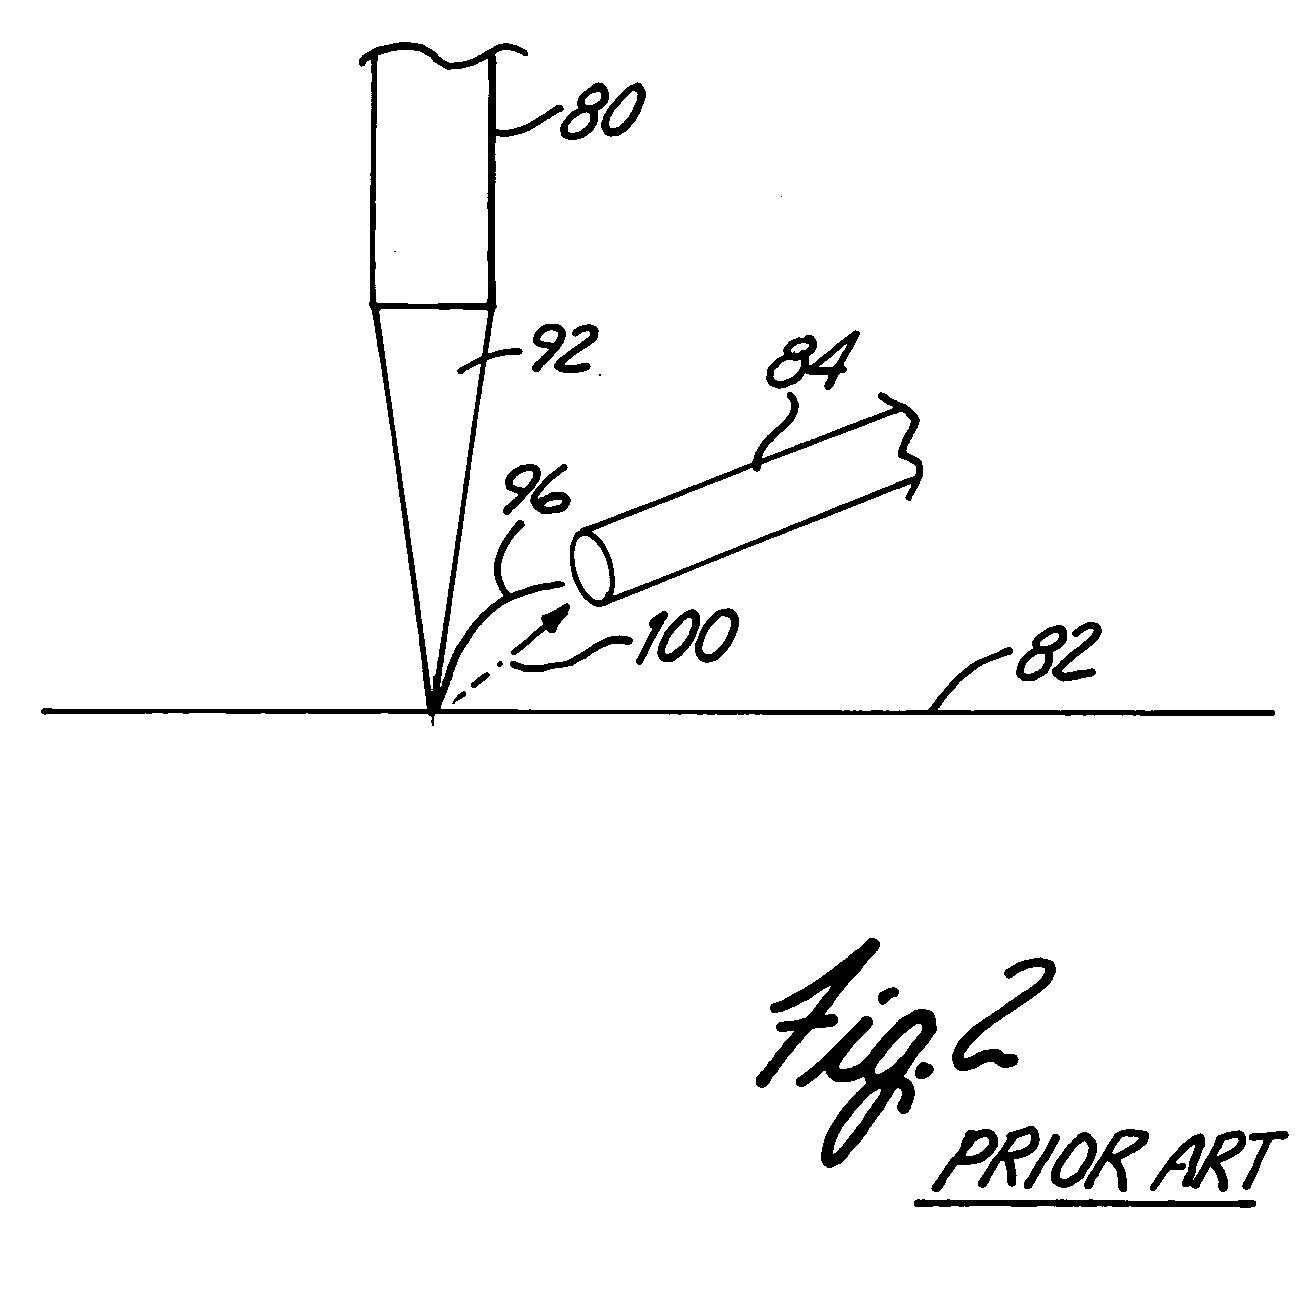 Powder feed nozzle for laser welding